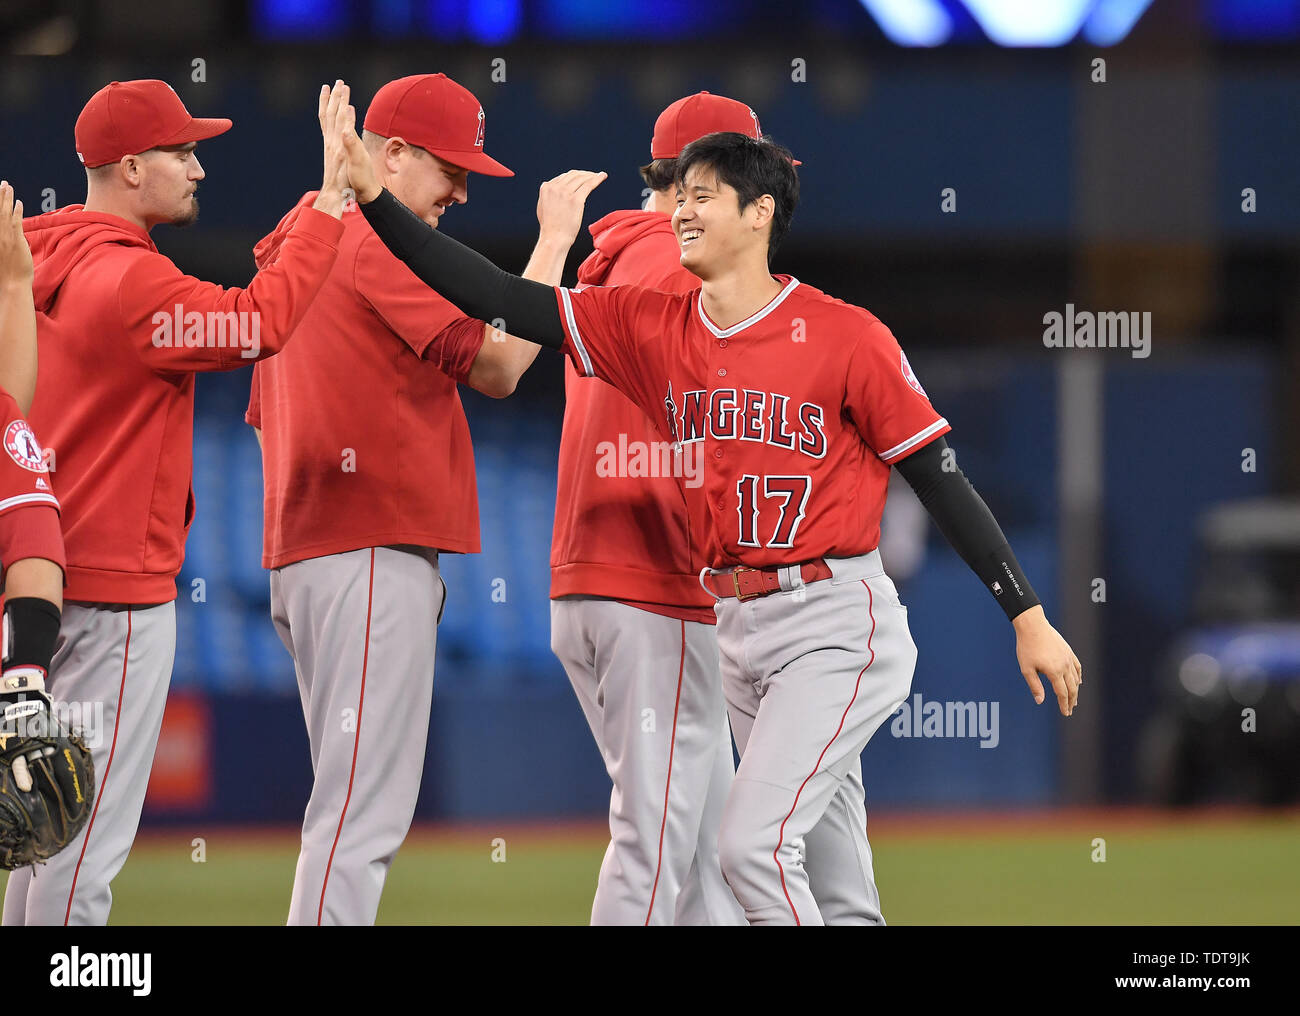 Toronto, Canada. 17th June, 2019. Los Angeles Angels' Shohei Ohtani (17) high fives his teammates after winning the Major League Baseball game against the Toronto Blue Jays at Rogers Centre in Toronto, Canada, June 17, 2019. Credit: AFLO/Alamy Live News Stock Photo